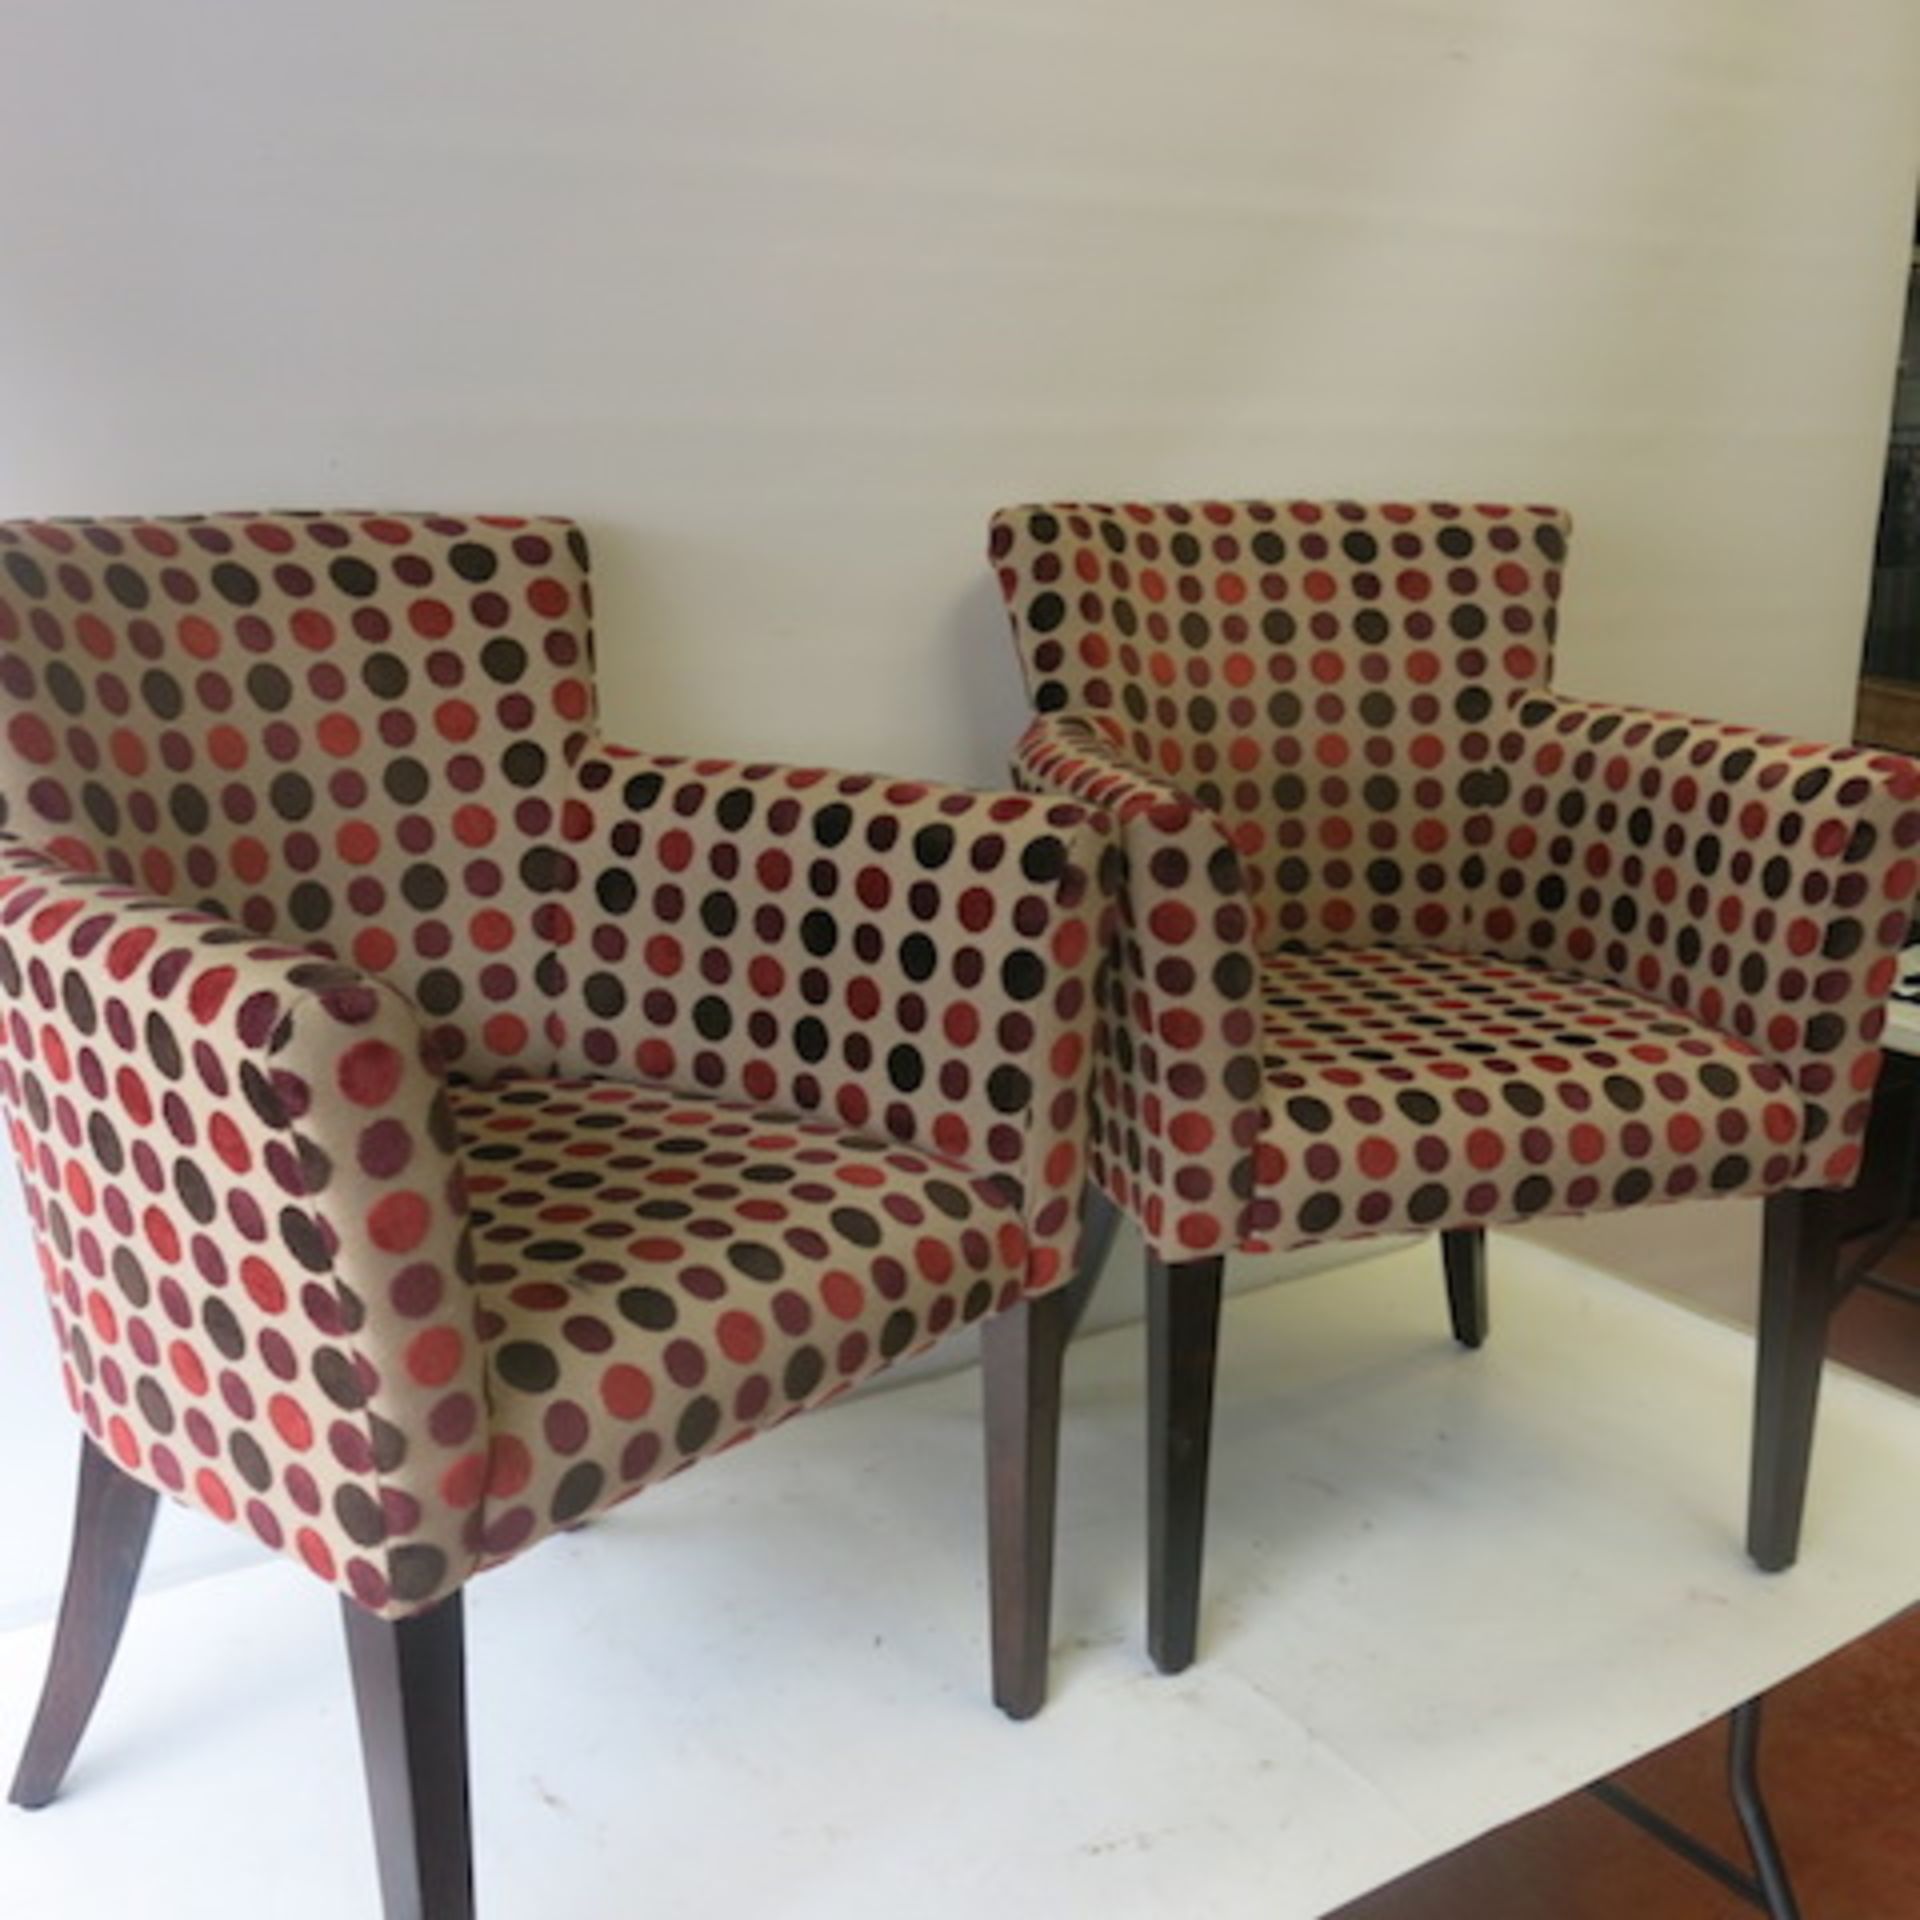 2 x Matching Armchairs with Crushed Velour Spot Pattern, Some light marks, but still in - Image 3 of 6